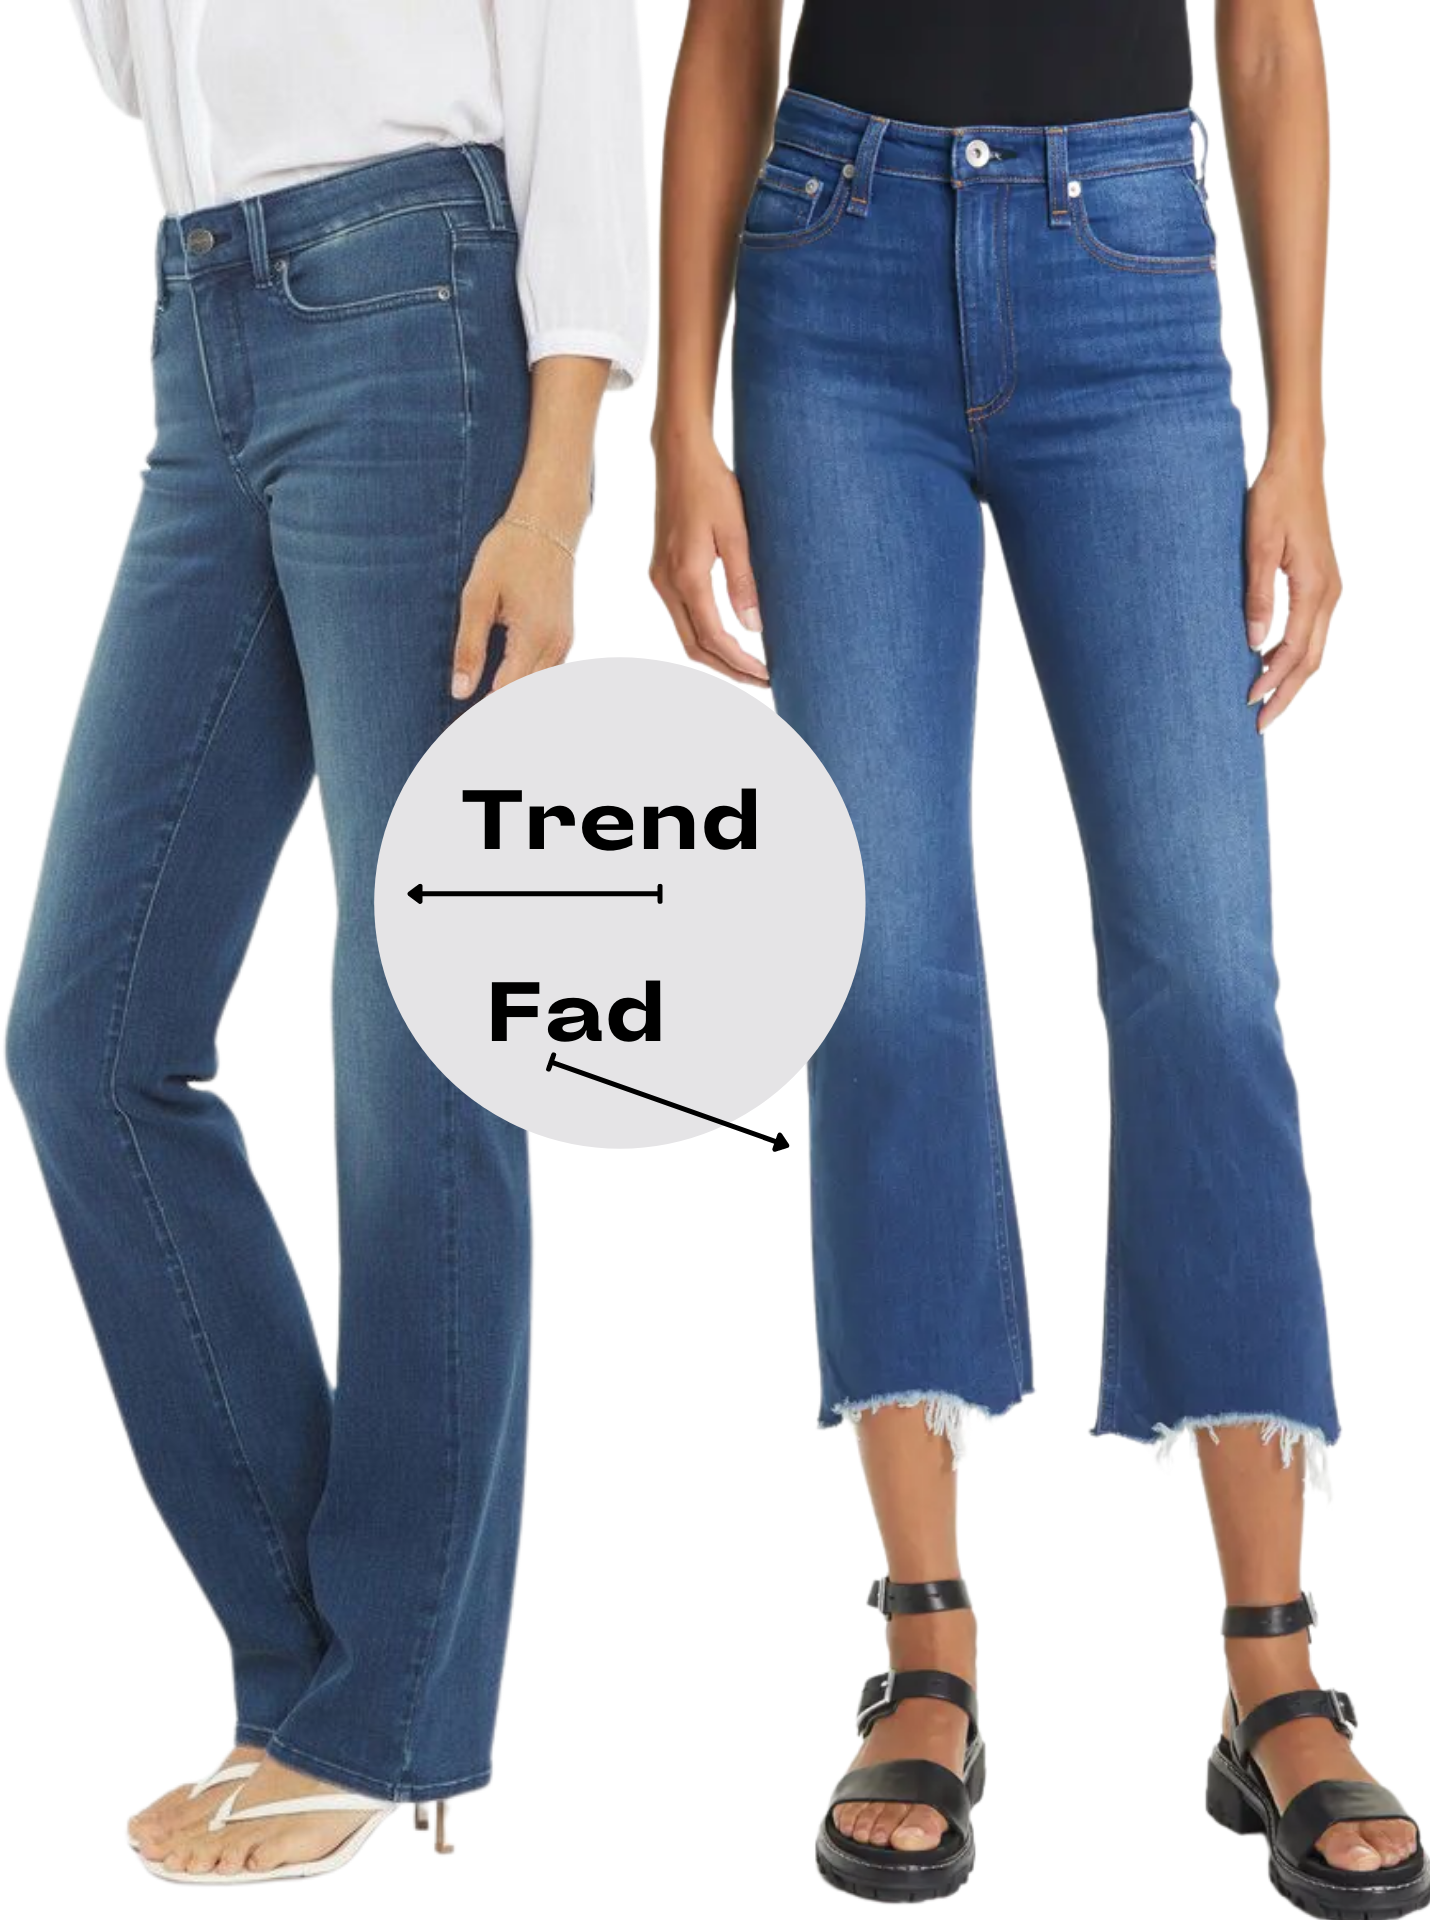 Trends and Fads